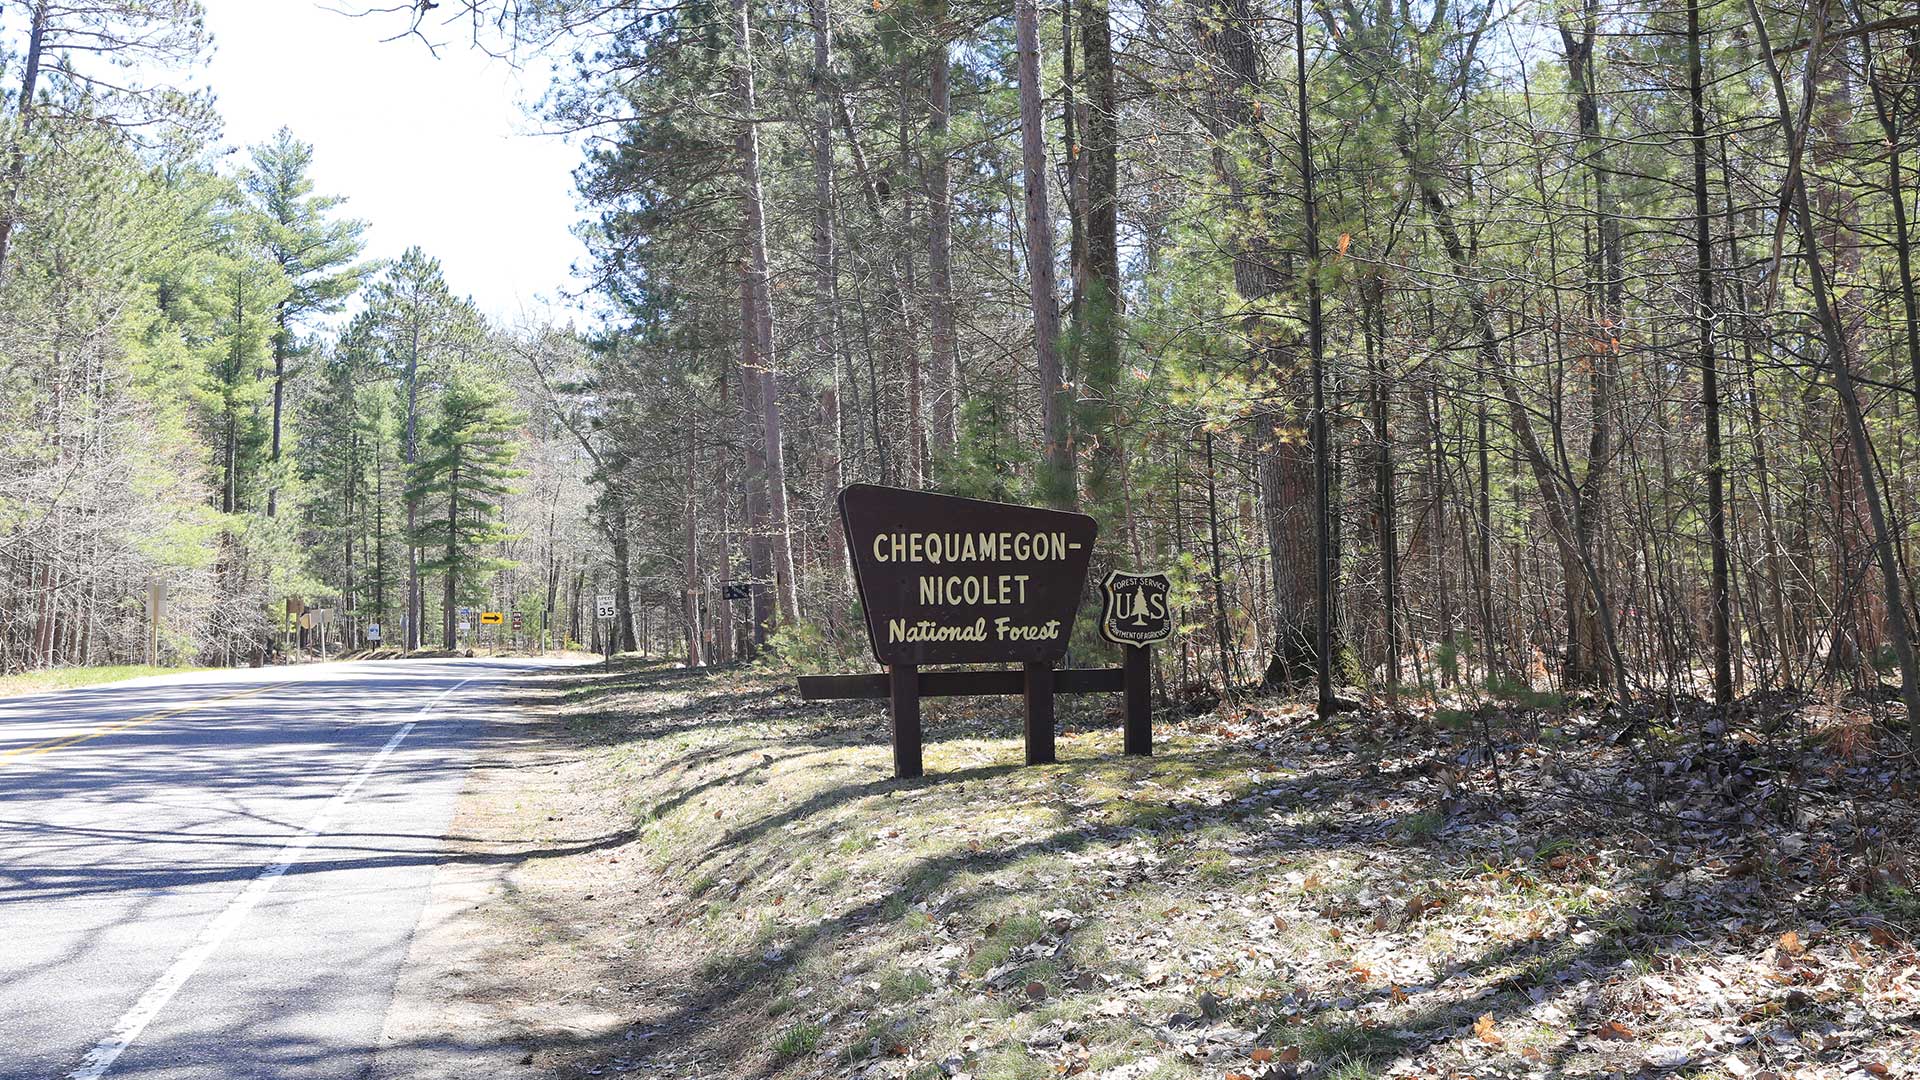 A roadside sign in Chequamegon-Nicolet National Forest, offering guidance and highlighting the natural beauty of the area